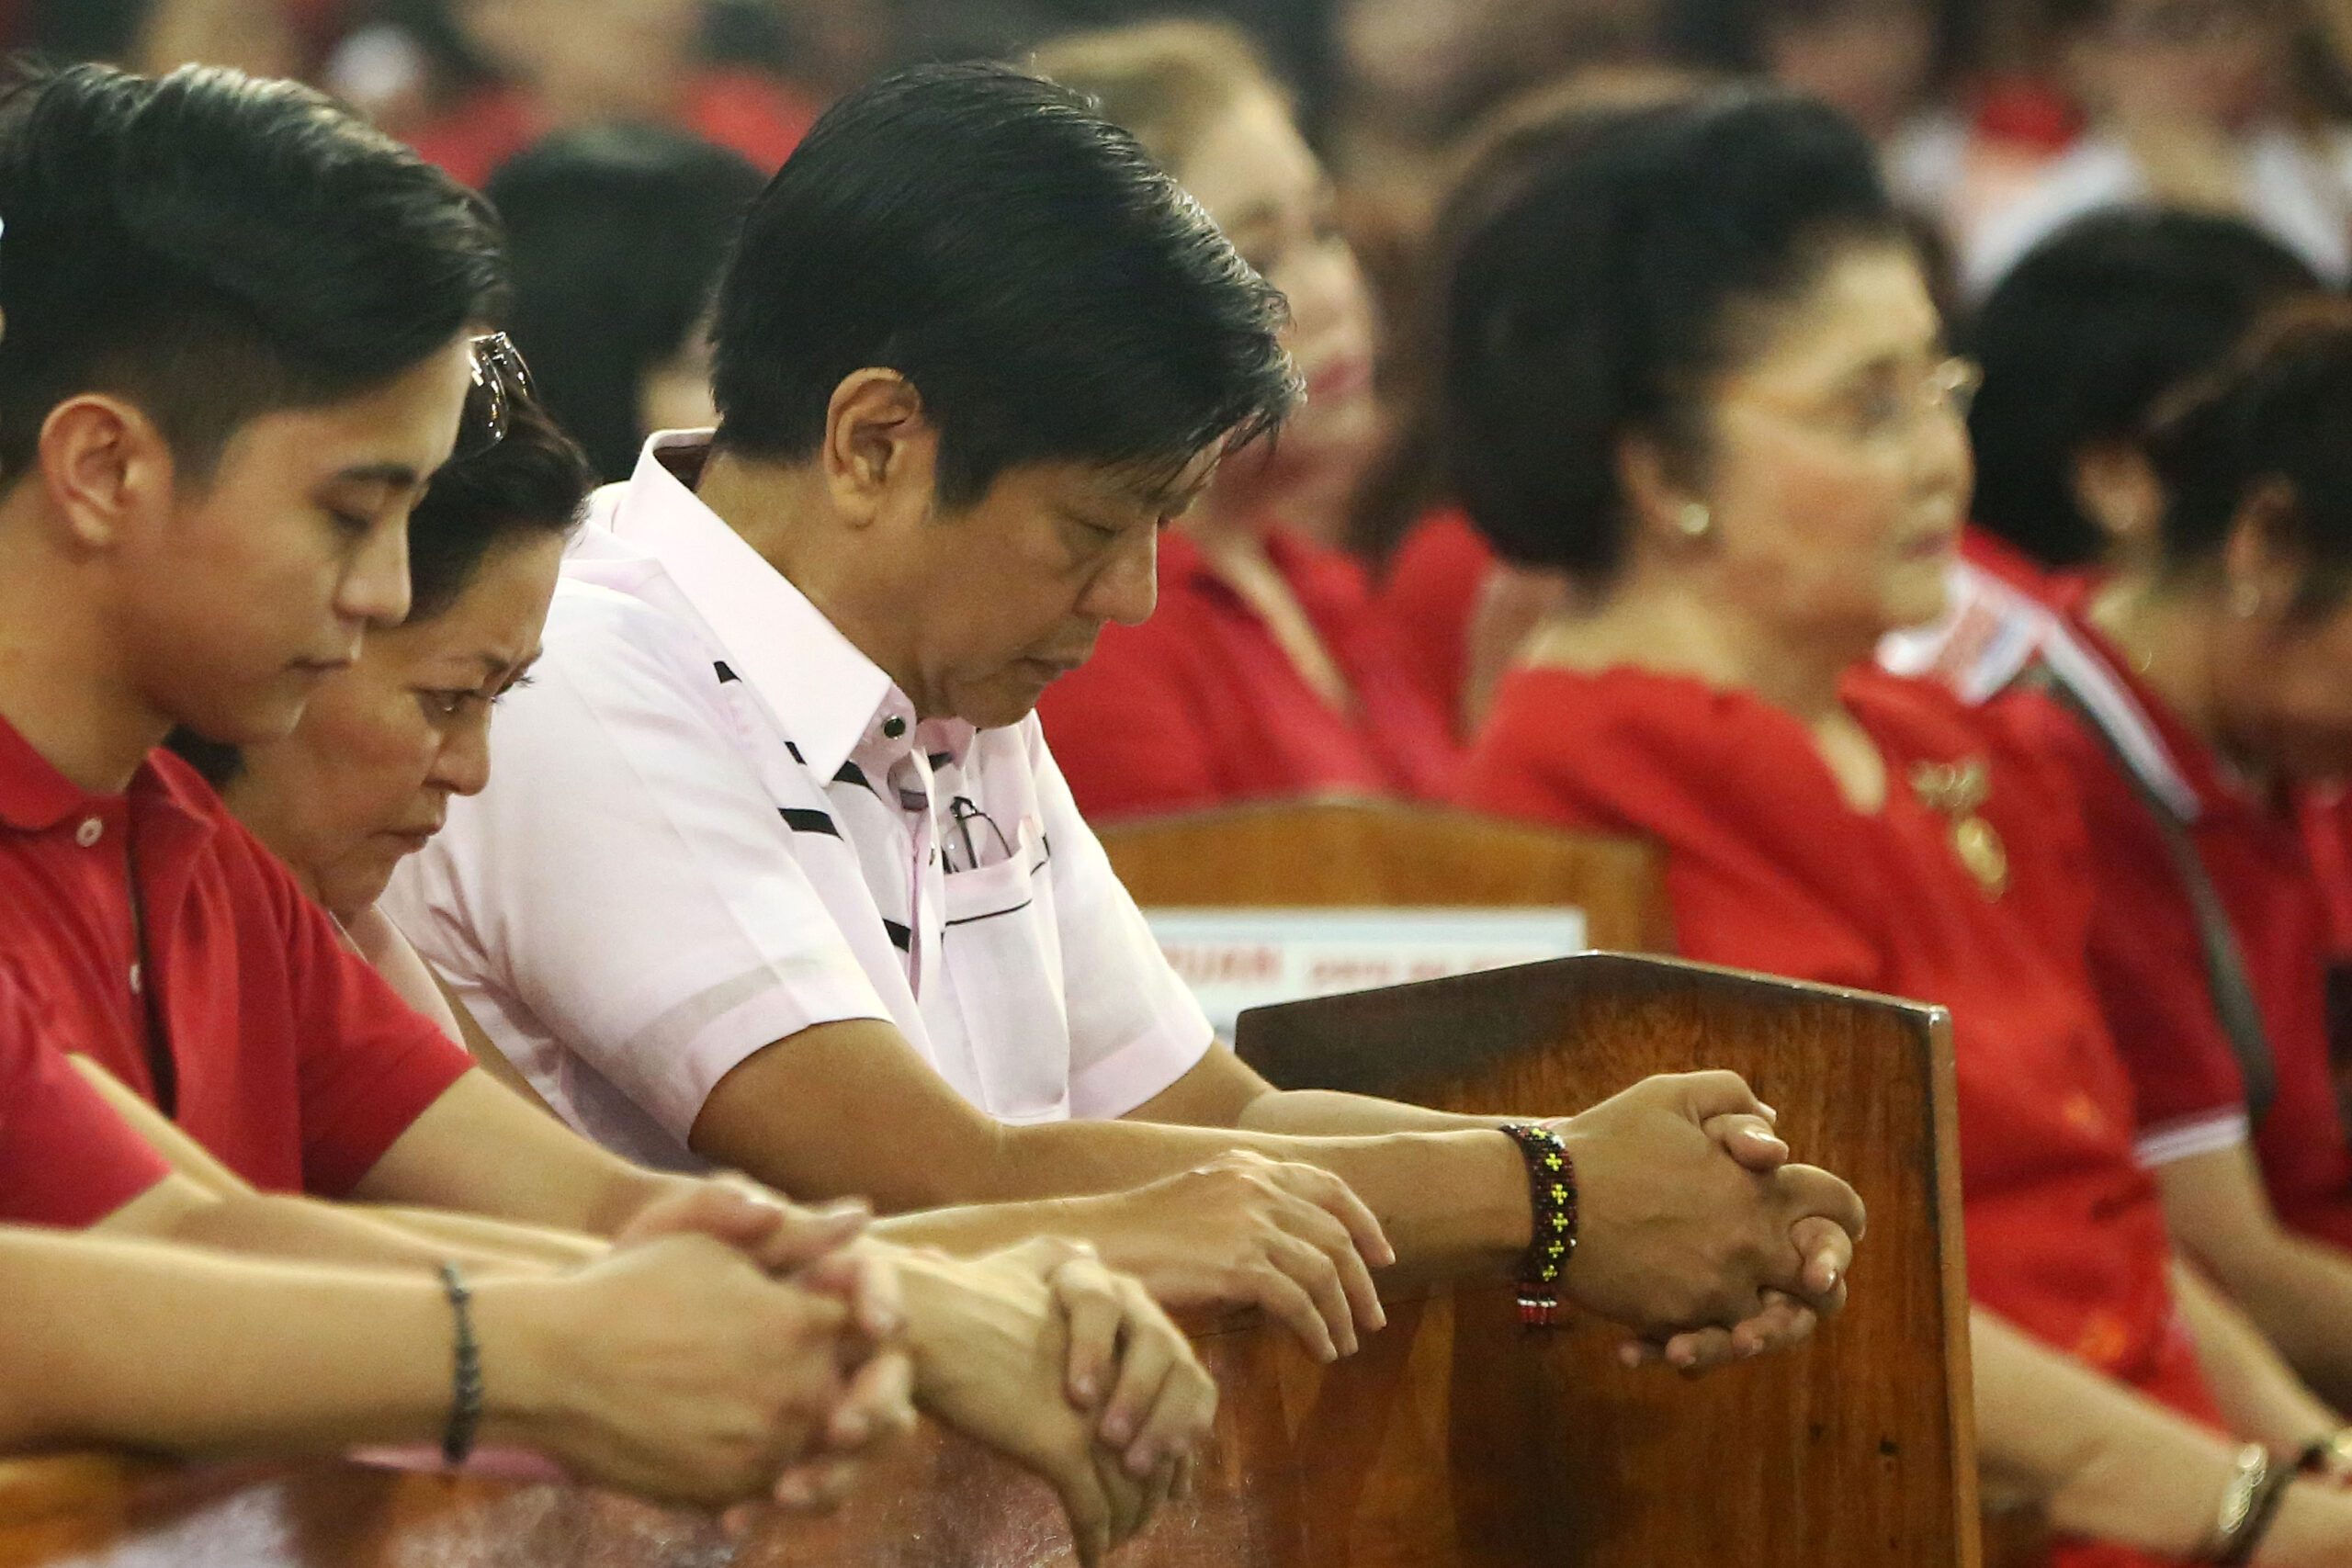 IN PHOTOS: Bongbong Marcos’ mass for ‘truthful’ election results